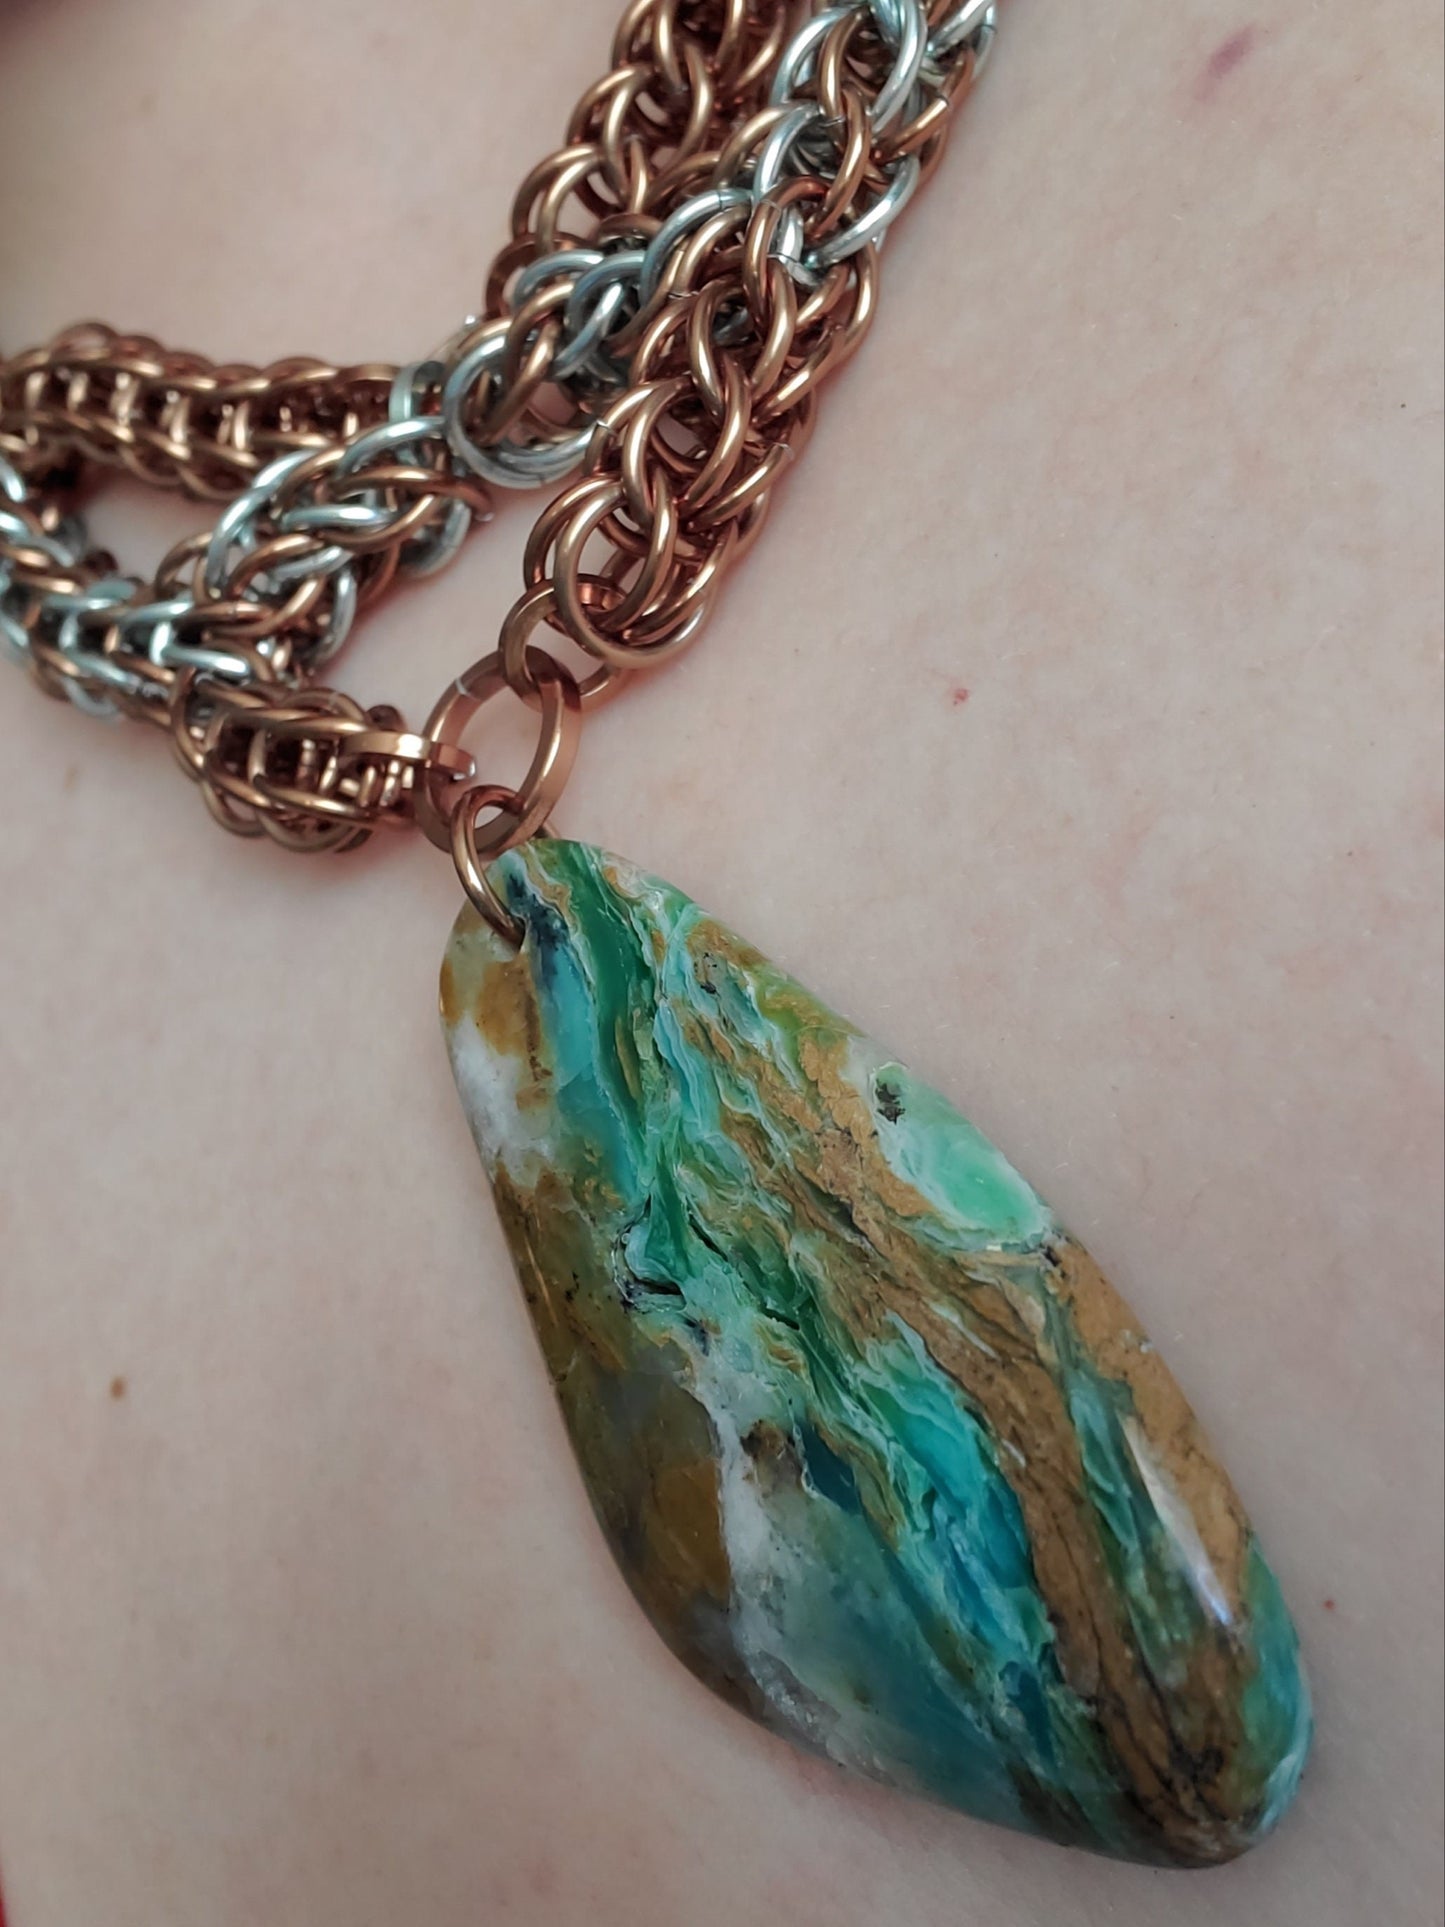 Bronze and Seafoam Full Persian necklace with Gerry Green Jasper stone pendant